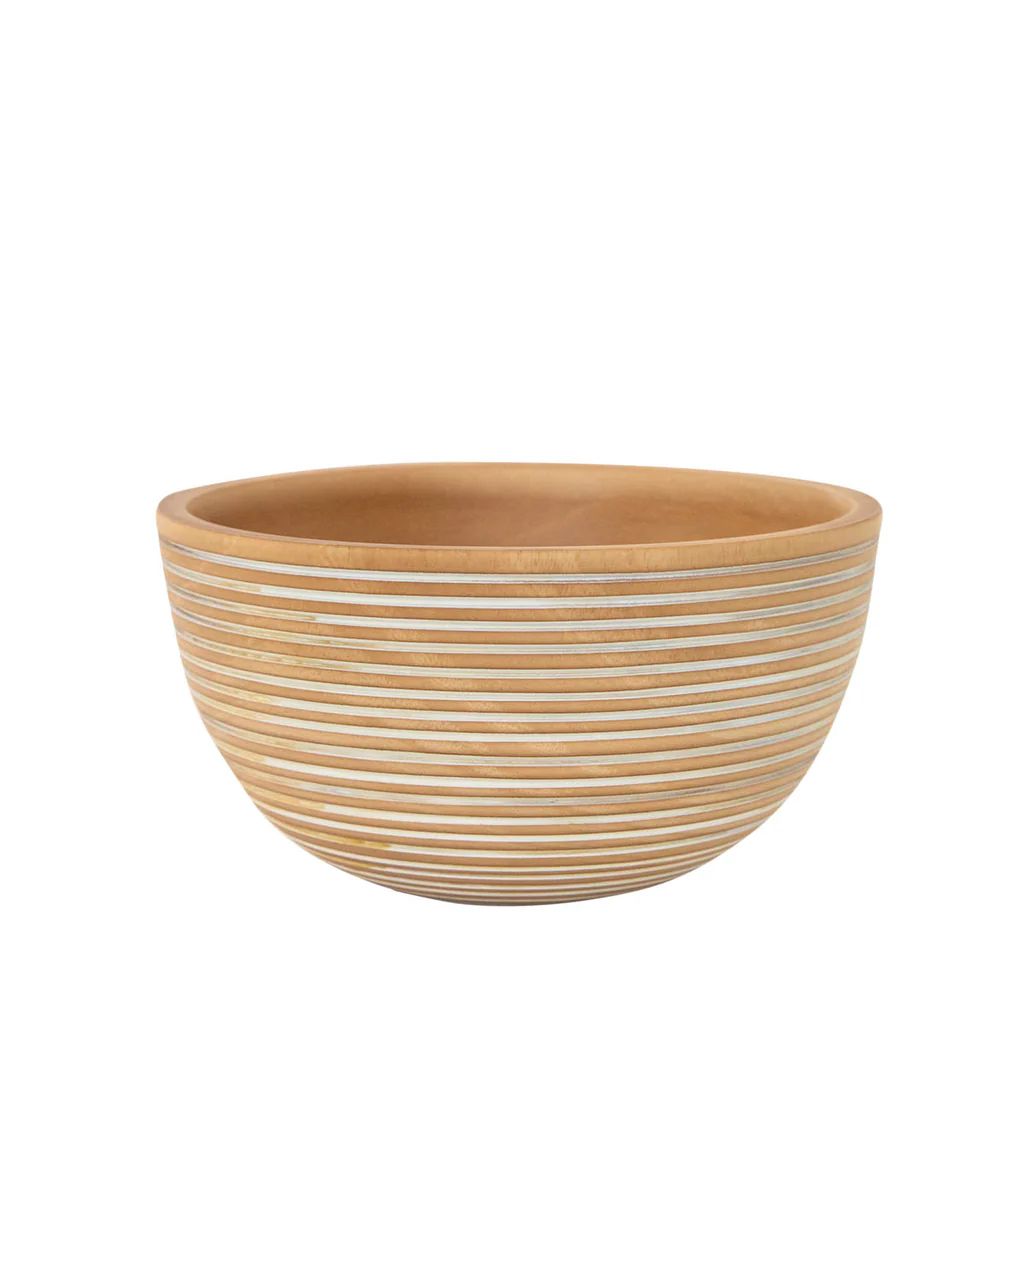 Wooden Striped Bowl | McGee & Co.